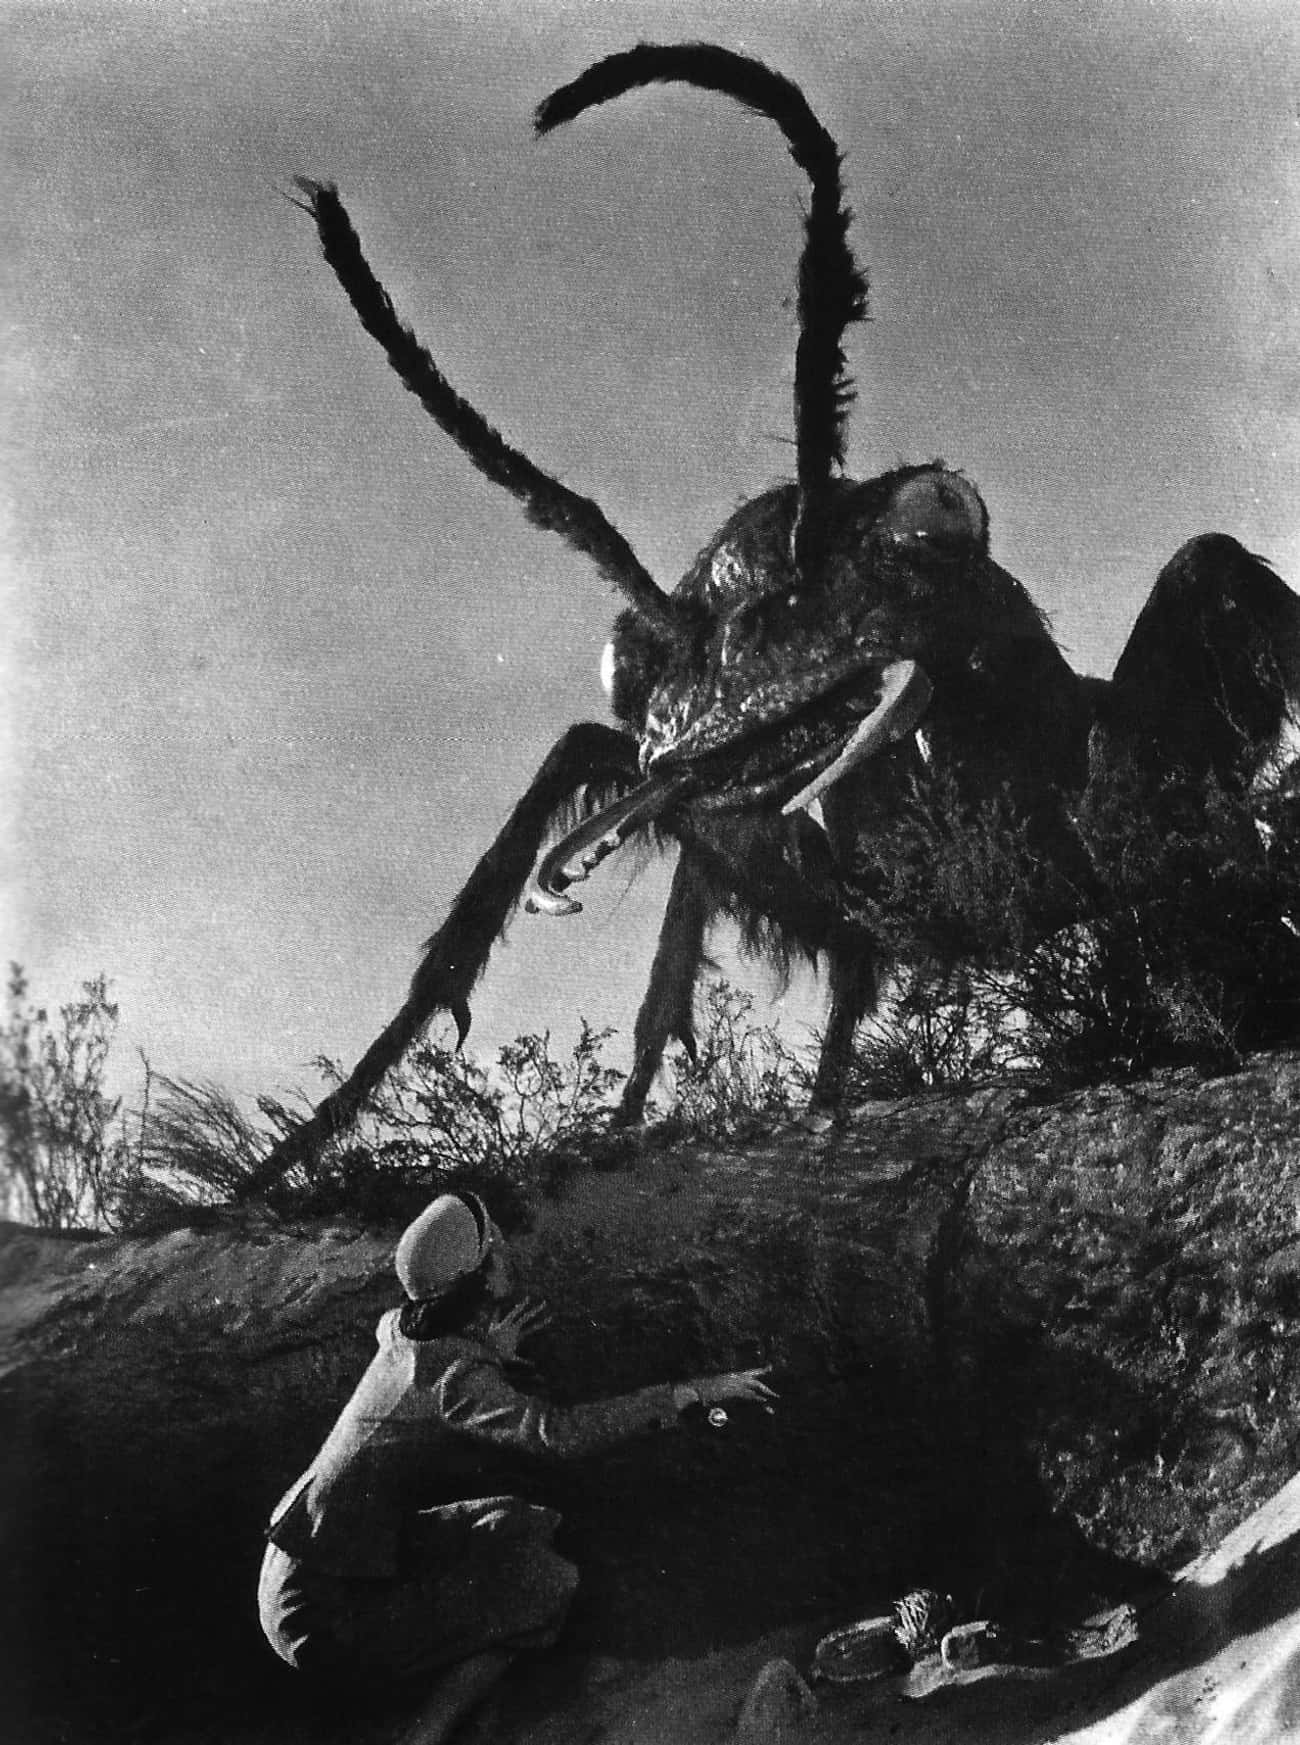 Bill Foster References The B-Movie Insect Terror Of &#39;Them!&#39;